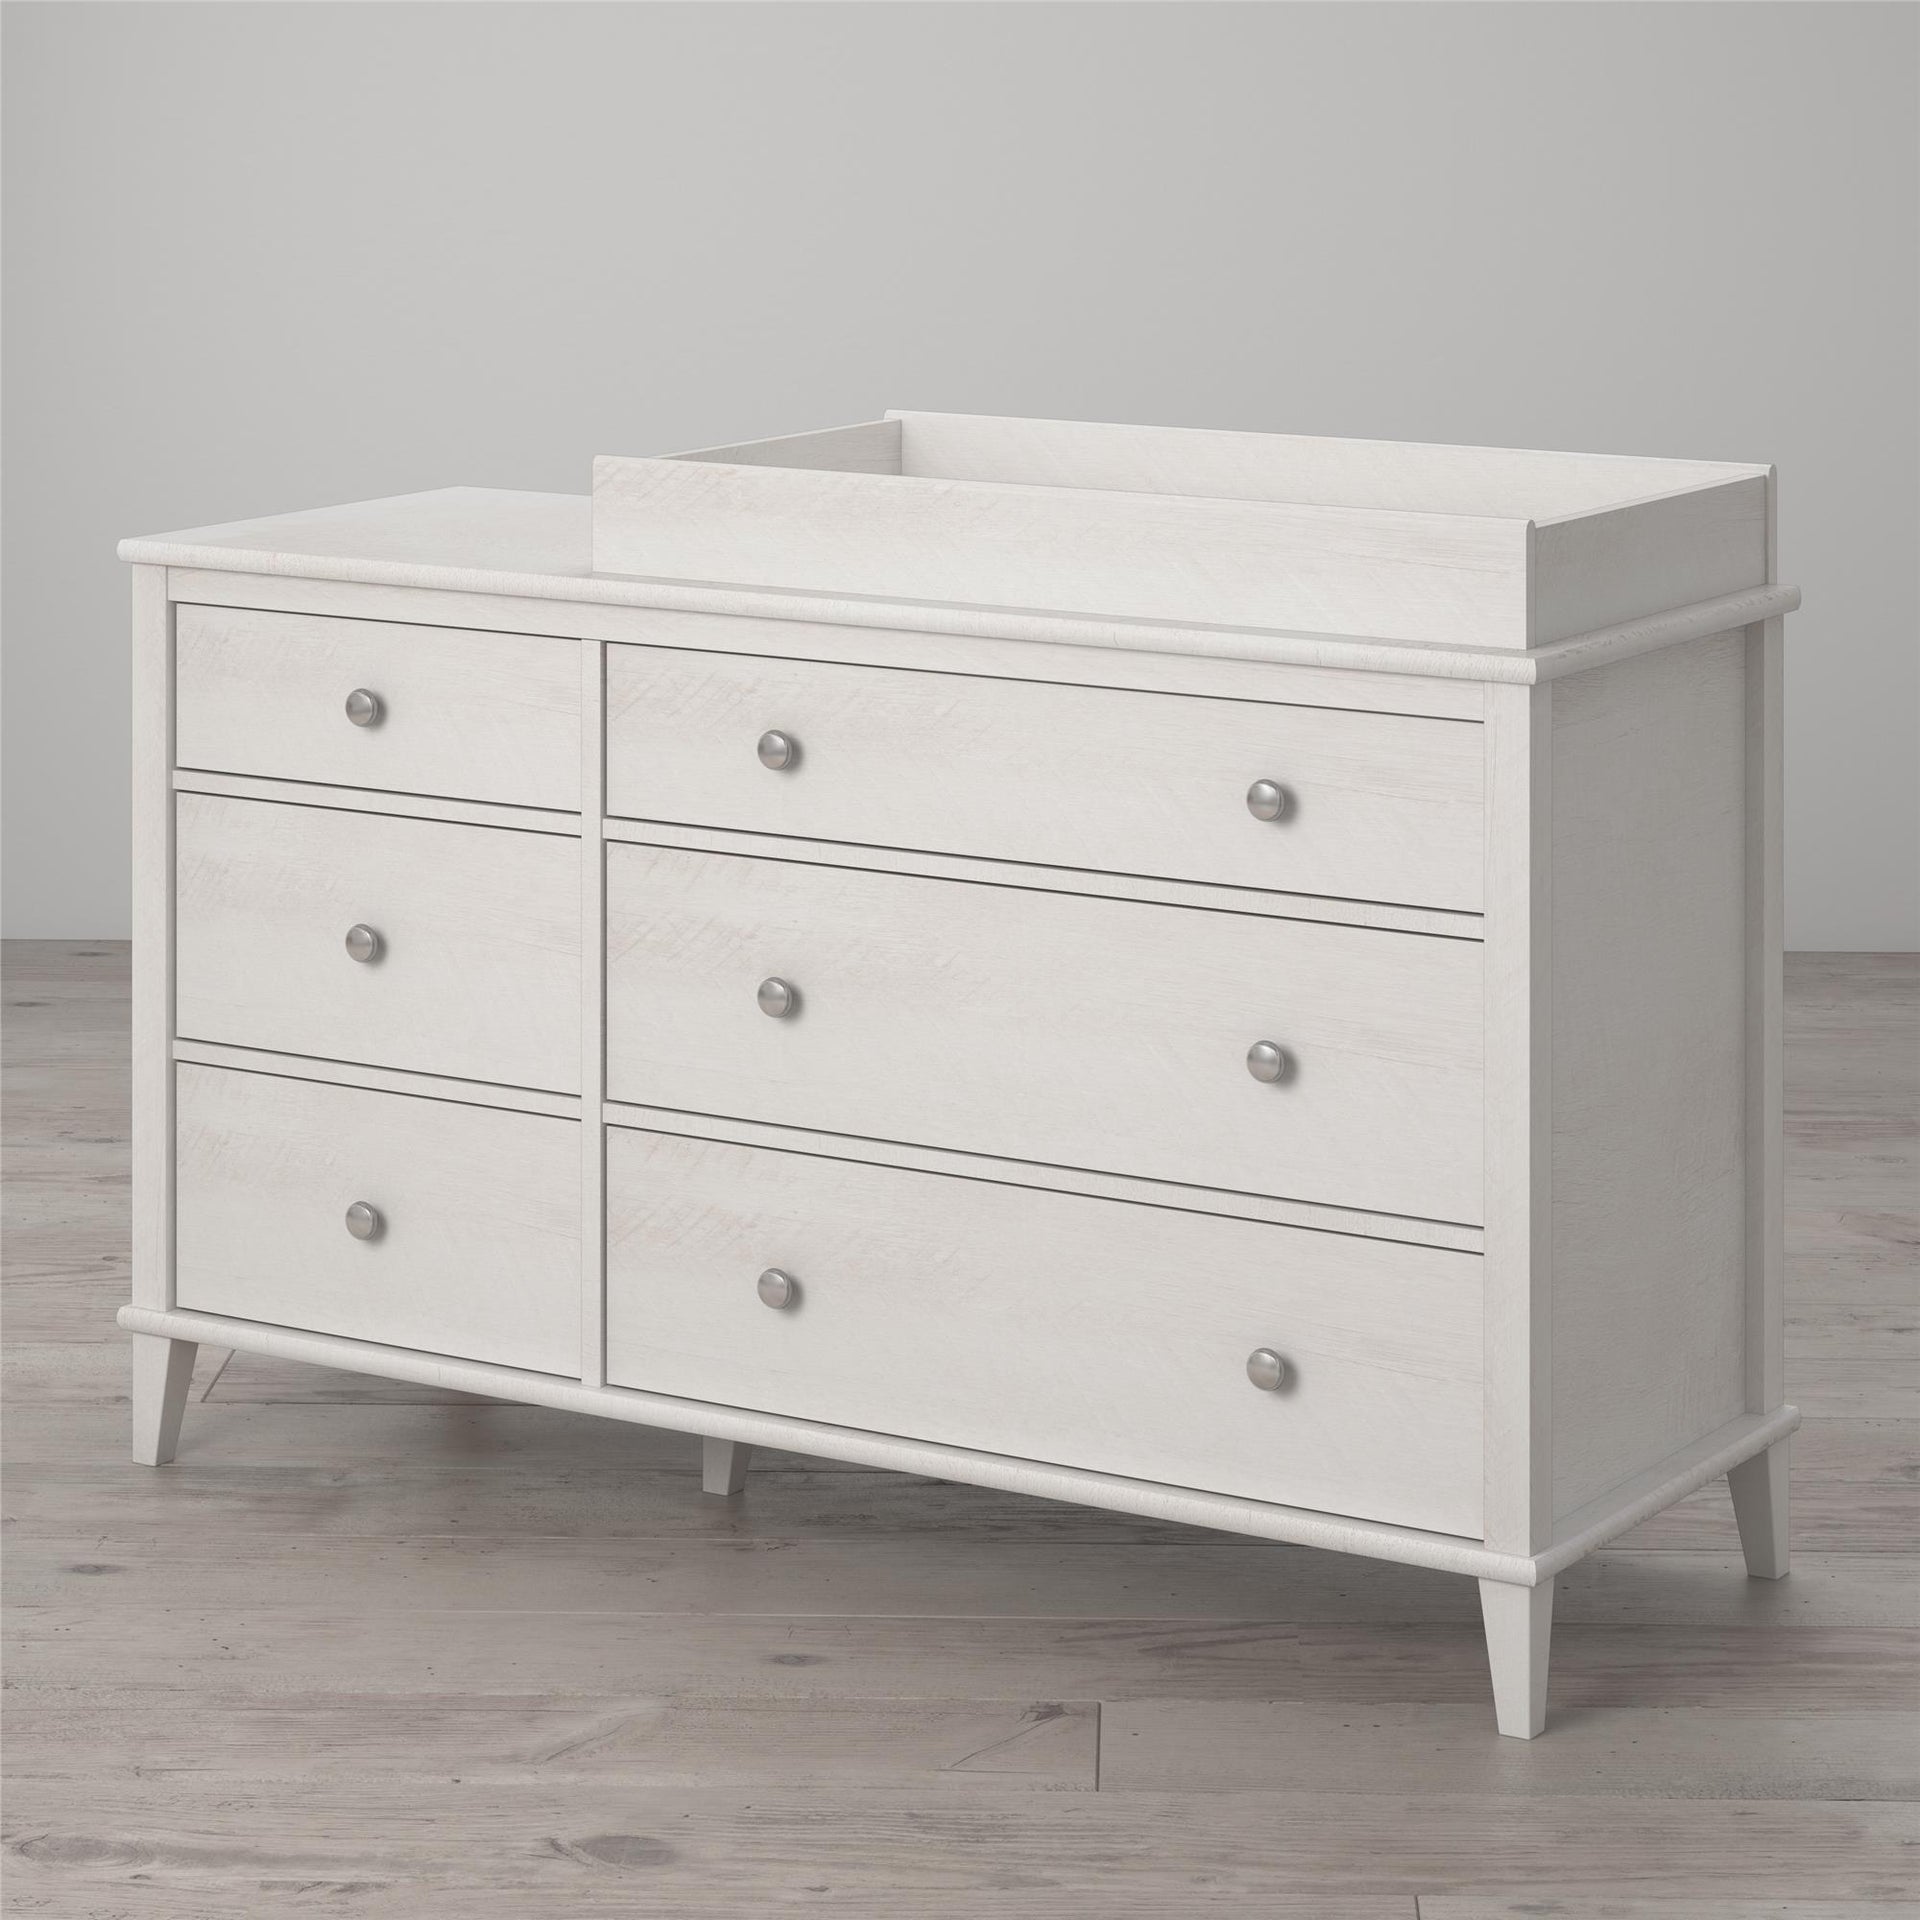 Monarch Hill Poppy 6 Drawer Changing Table - Ivory Oak